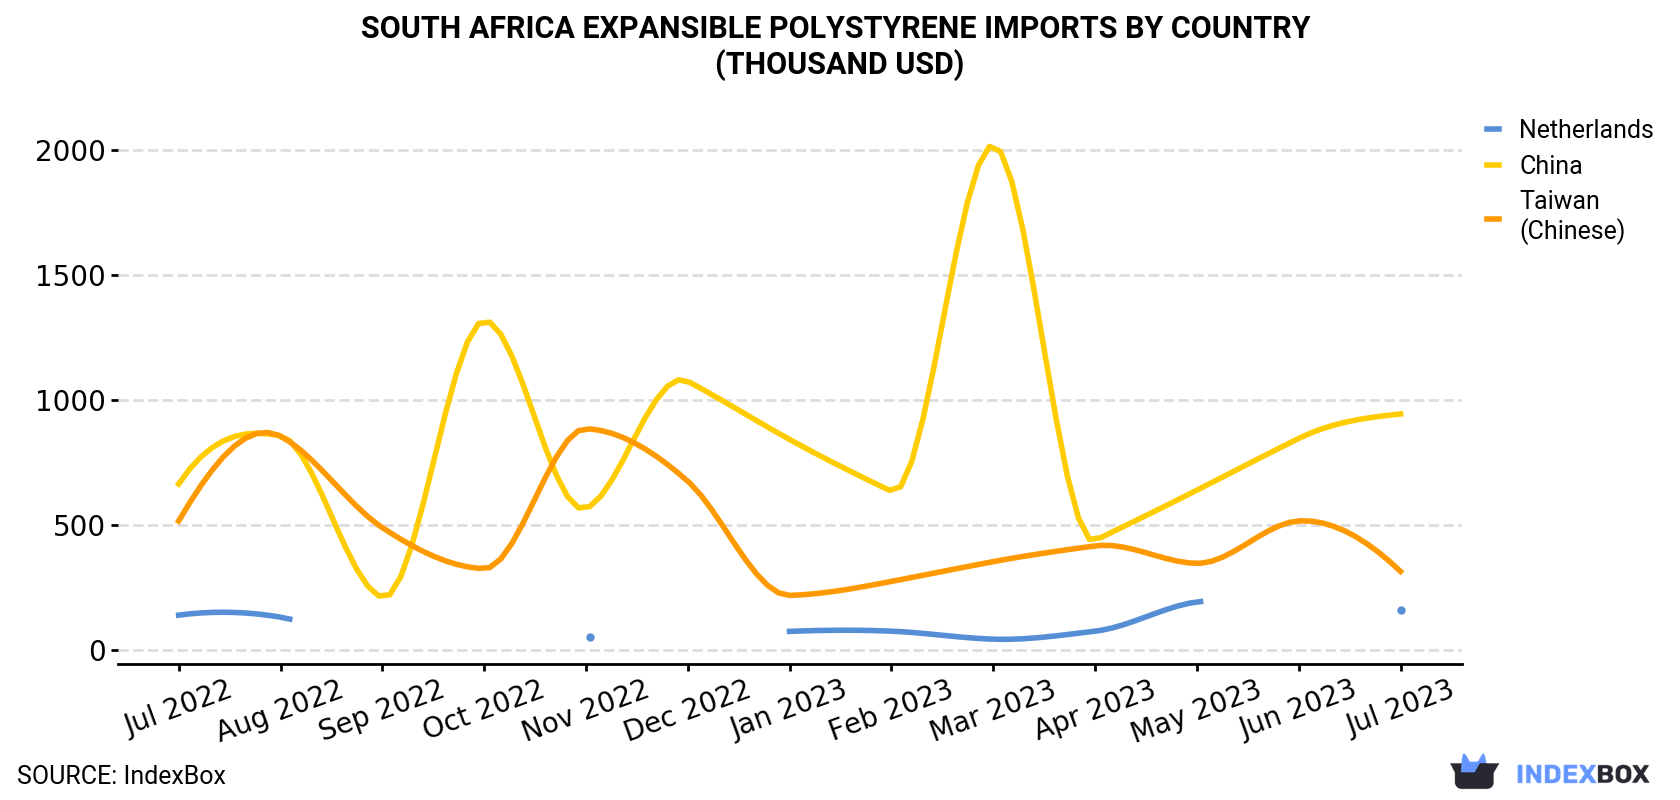 South Africa Expansible Polystyrene Imports By Country (Thousand USD)